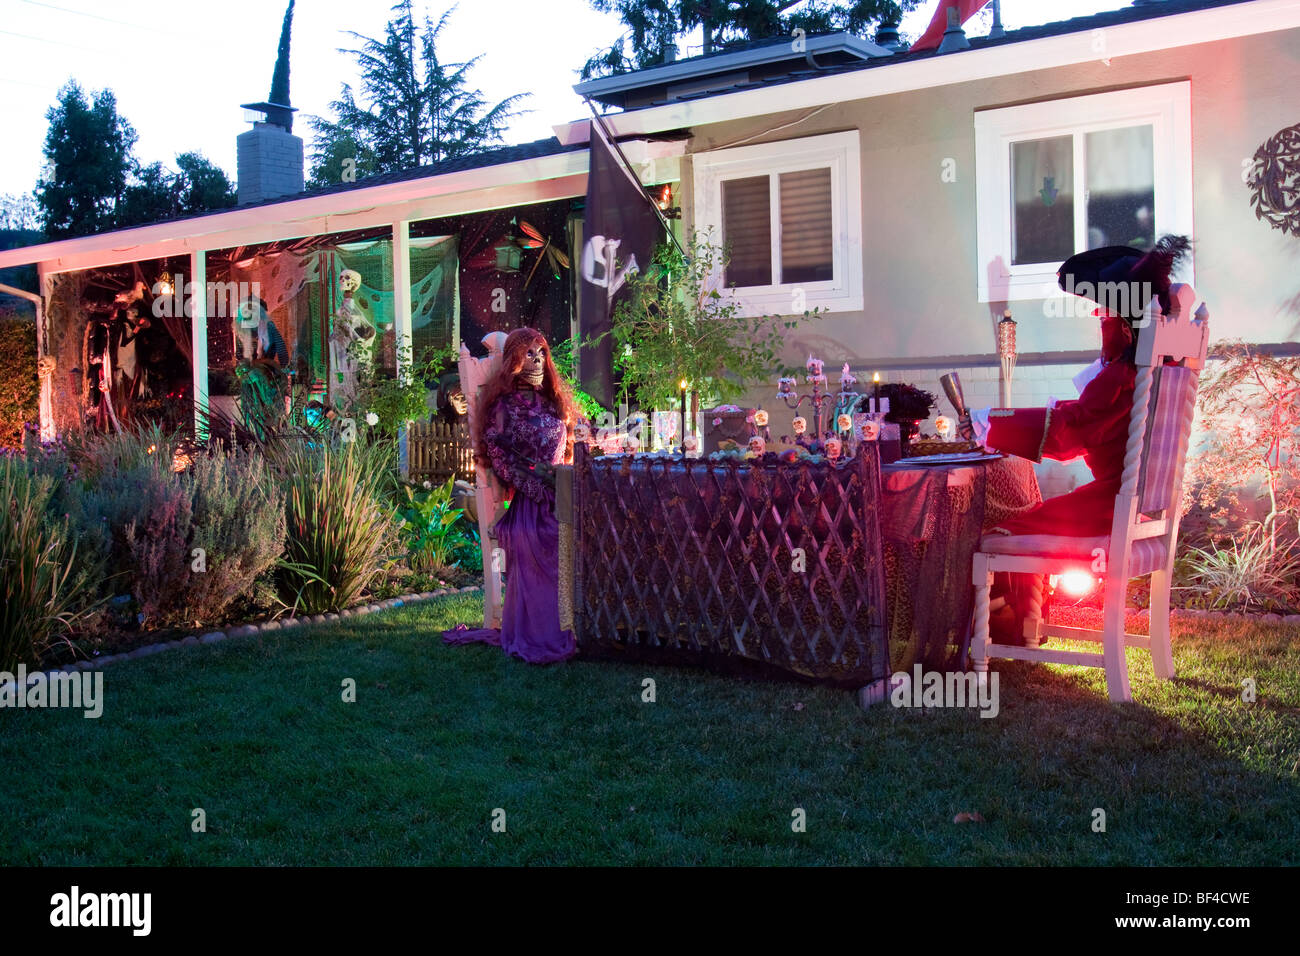 Skeletons dressed up sitting at dinner table as part of elaborate Halloween display on a house front lawn Stock Photo